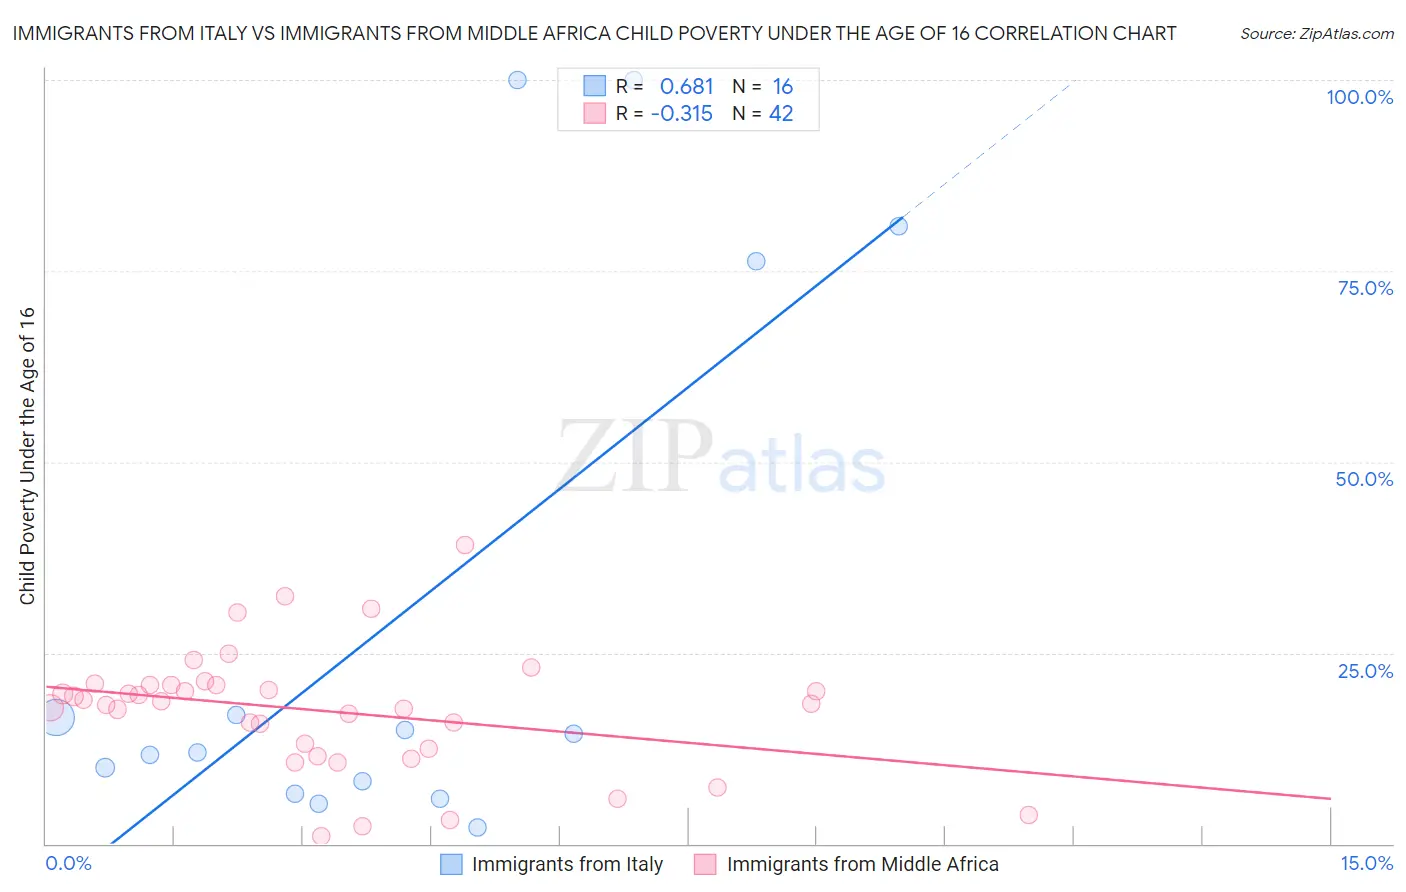 Immigrants from Italy vs Immigrants from Middle Africa Child Poverty Under the Age of 16